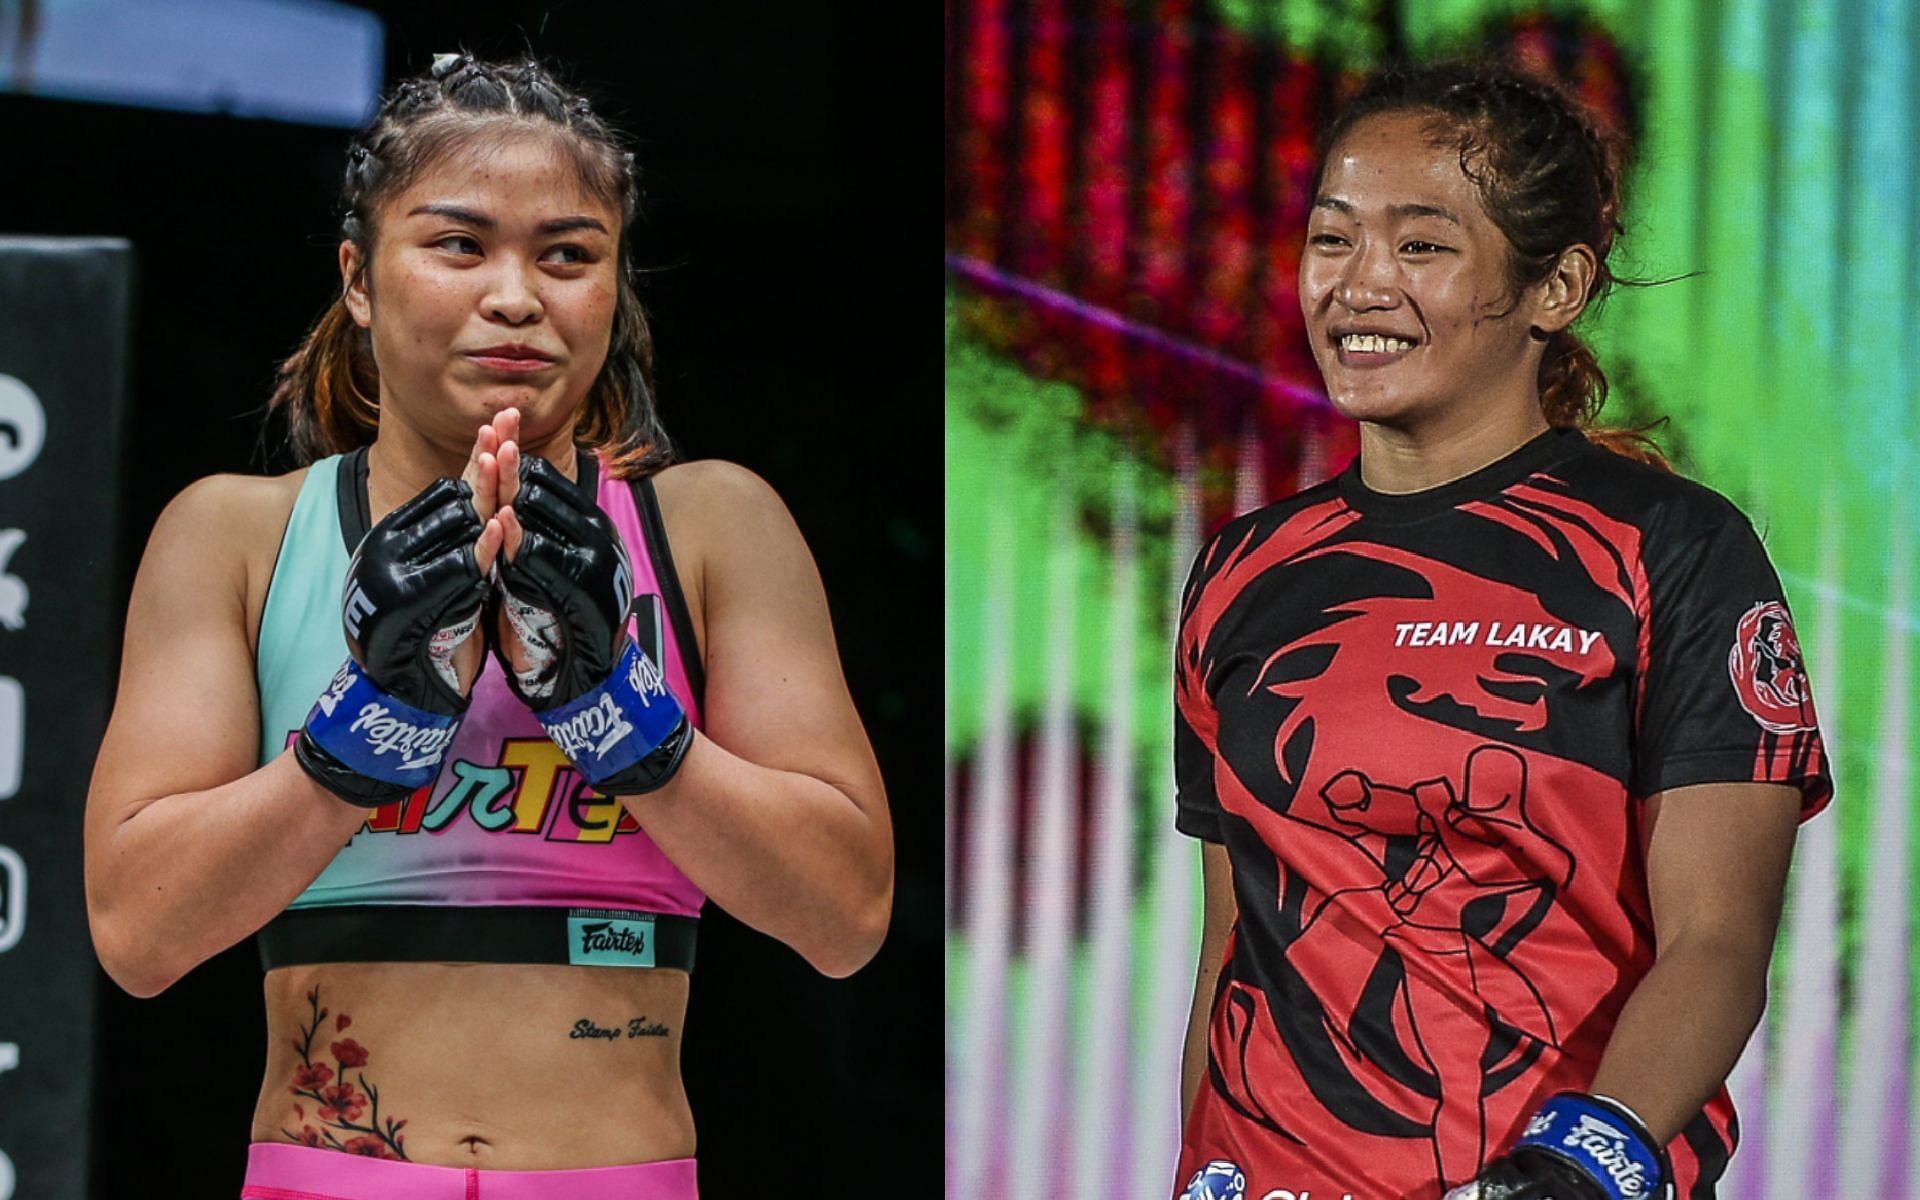 Stamp Fairtex (left) says Jenelyn Olsim (right) can become a world champion in the future. [Photos ONE Championship]